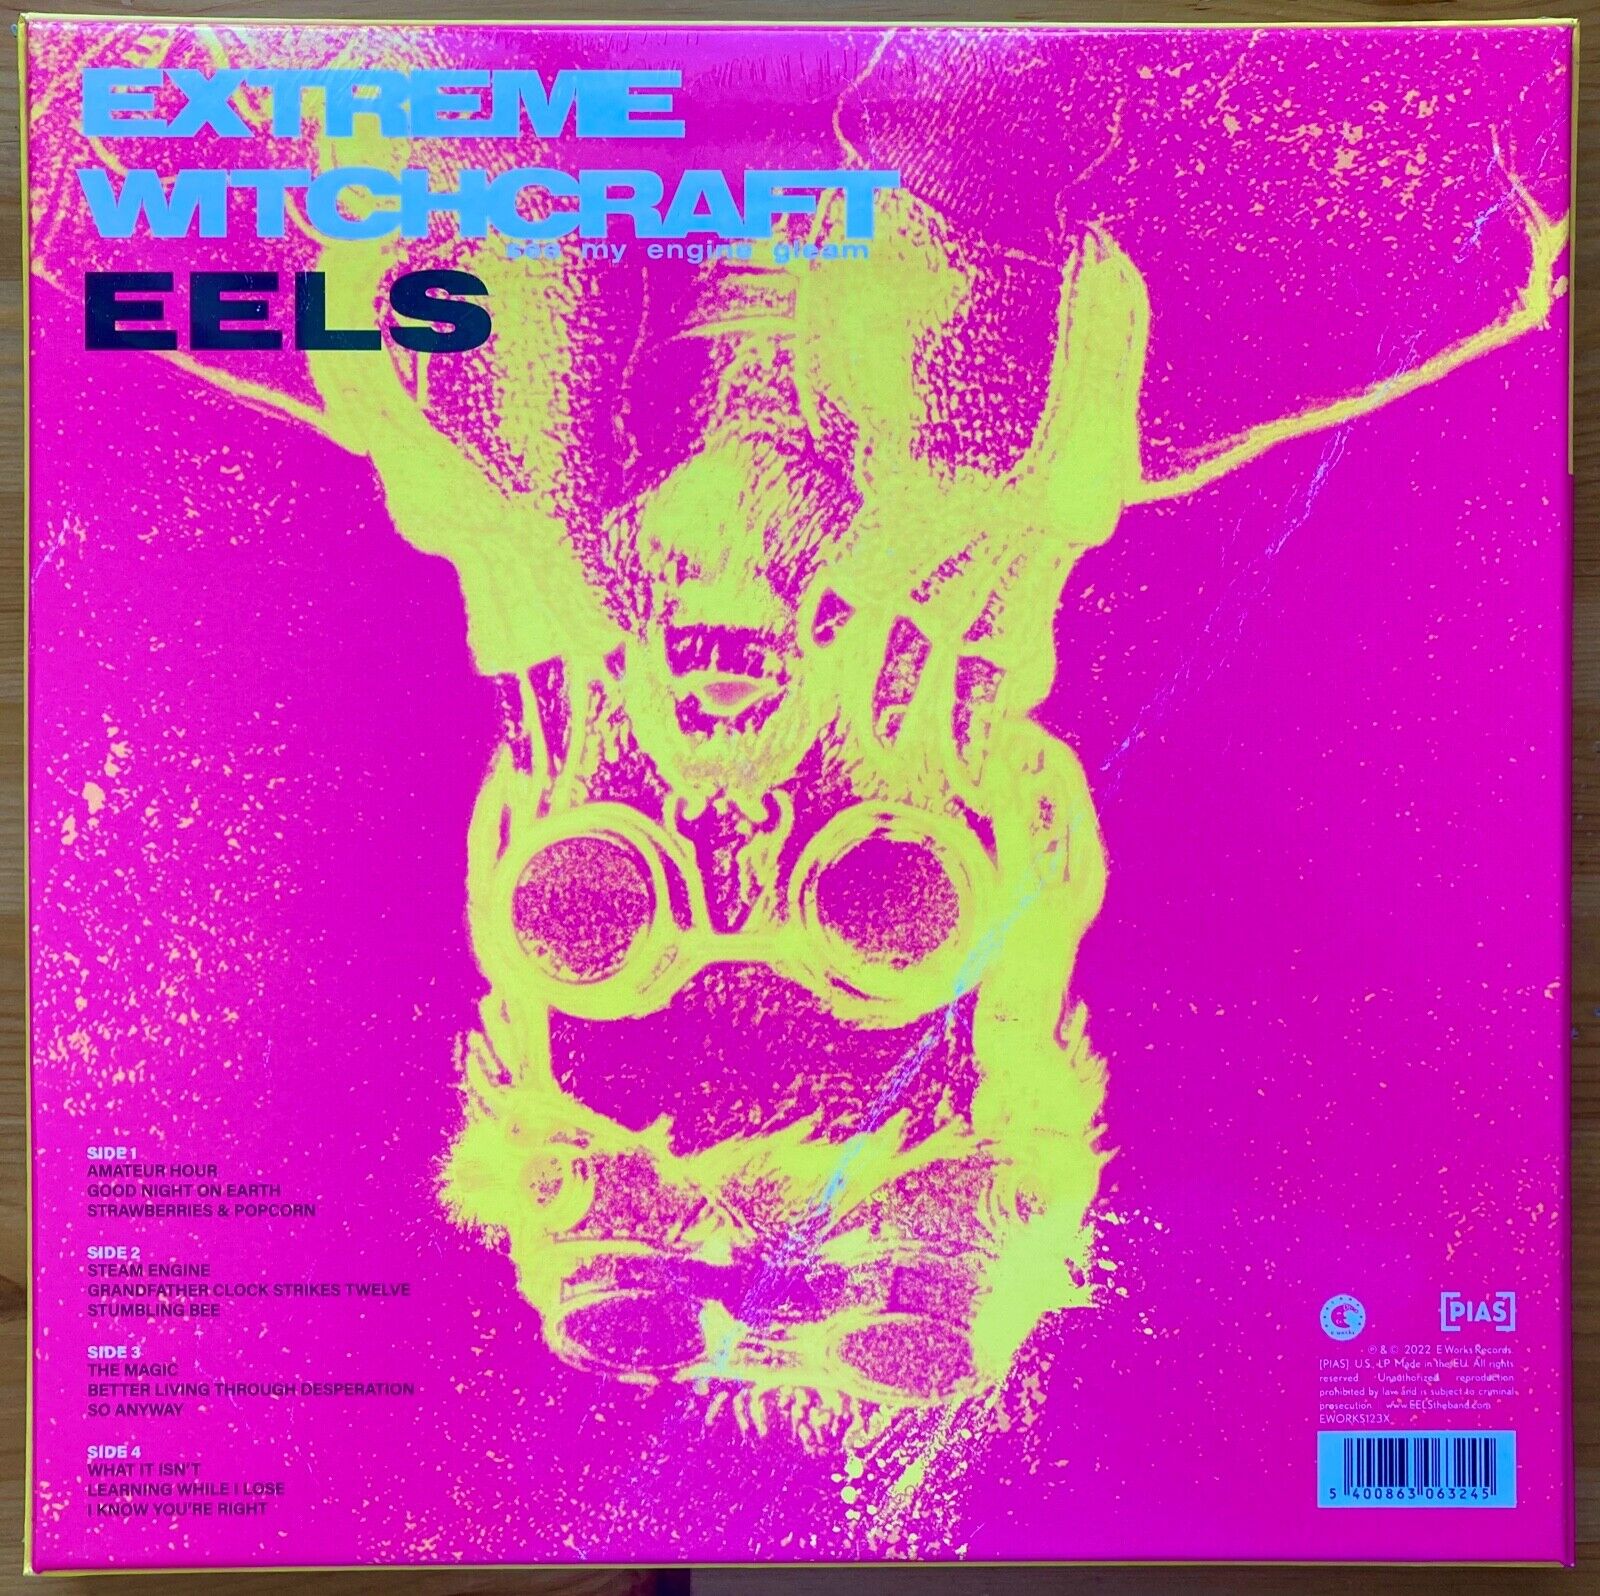 Eels - Extreme Witchcraft See My Engine Gleam Yellow Vinyl 2LP + CD Limited & Deluxe Edition